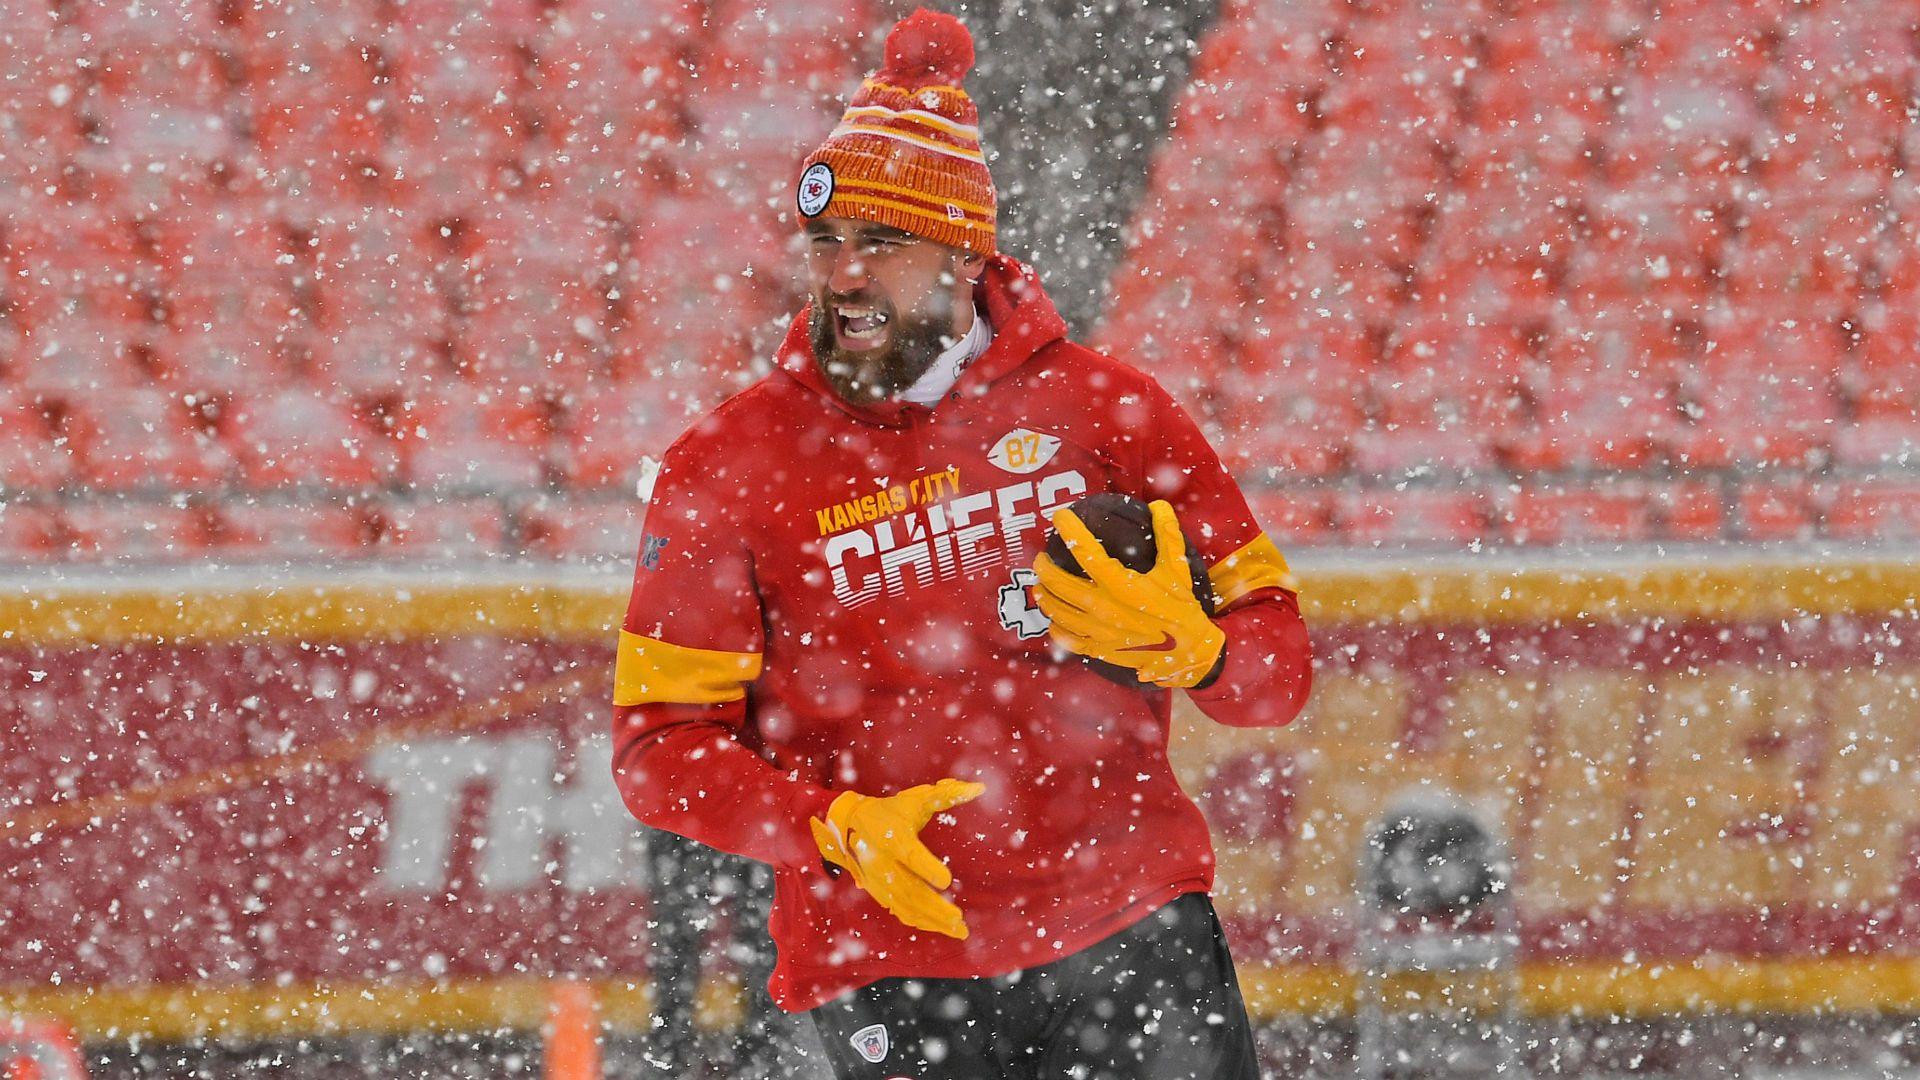 Snow problem for Kelce as Chiefs tight end sets NFL record